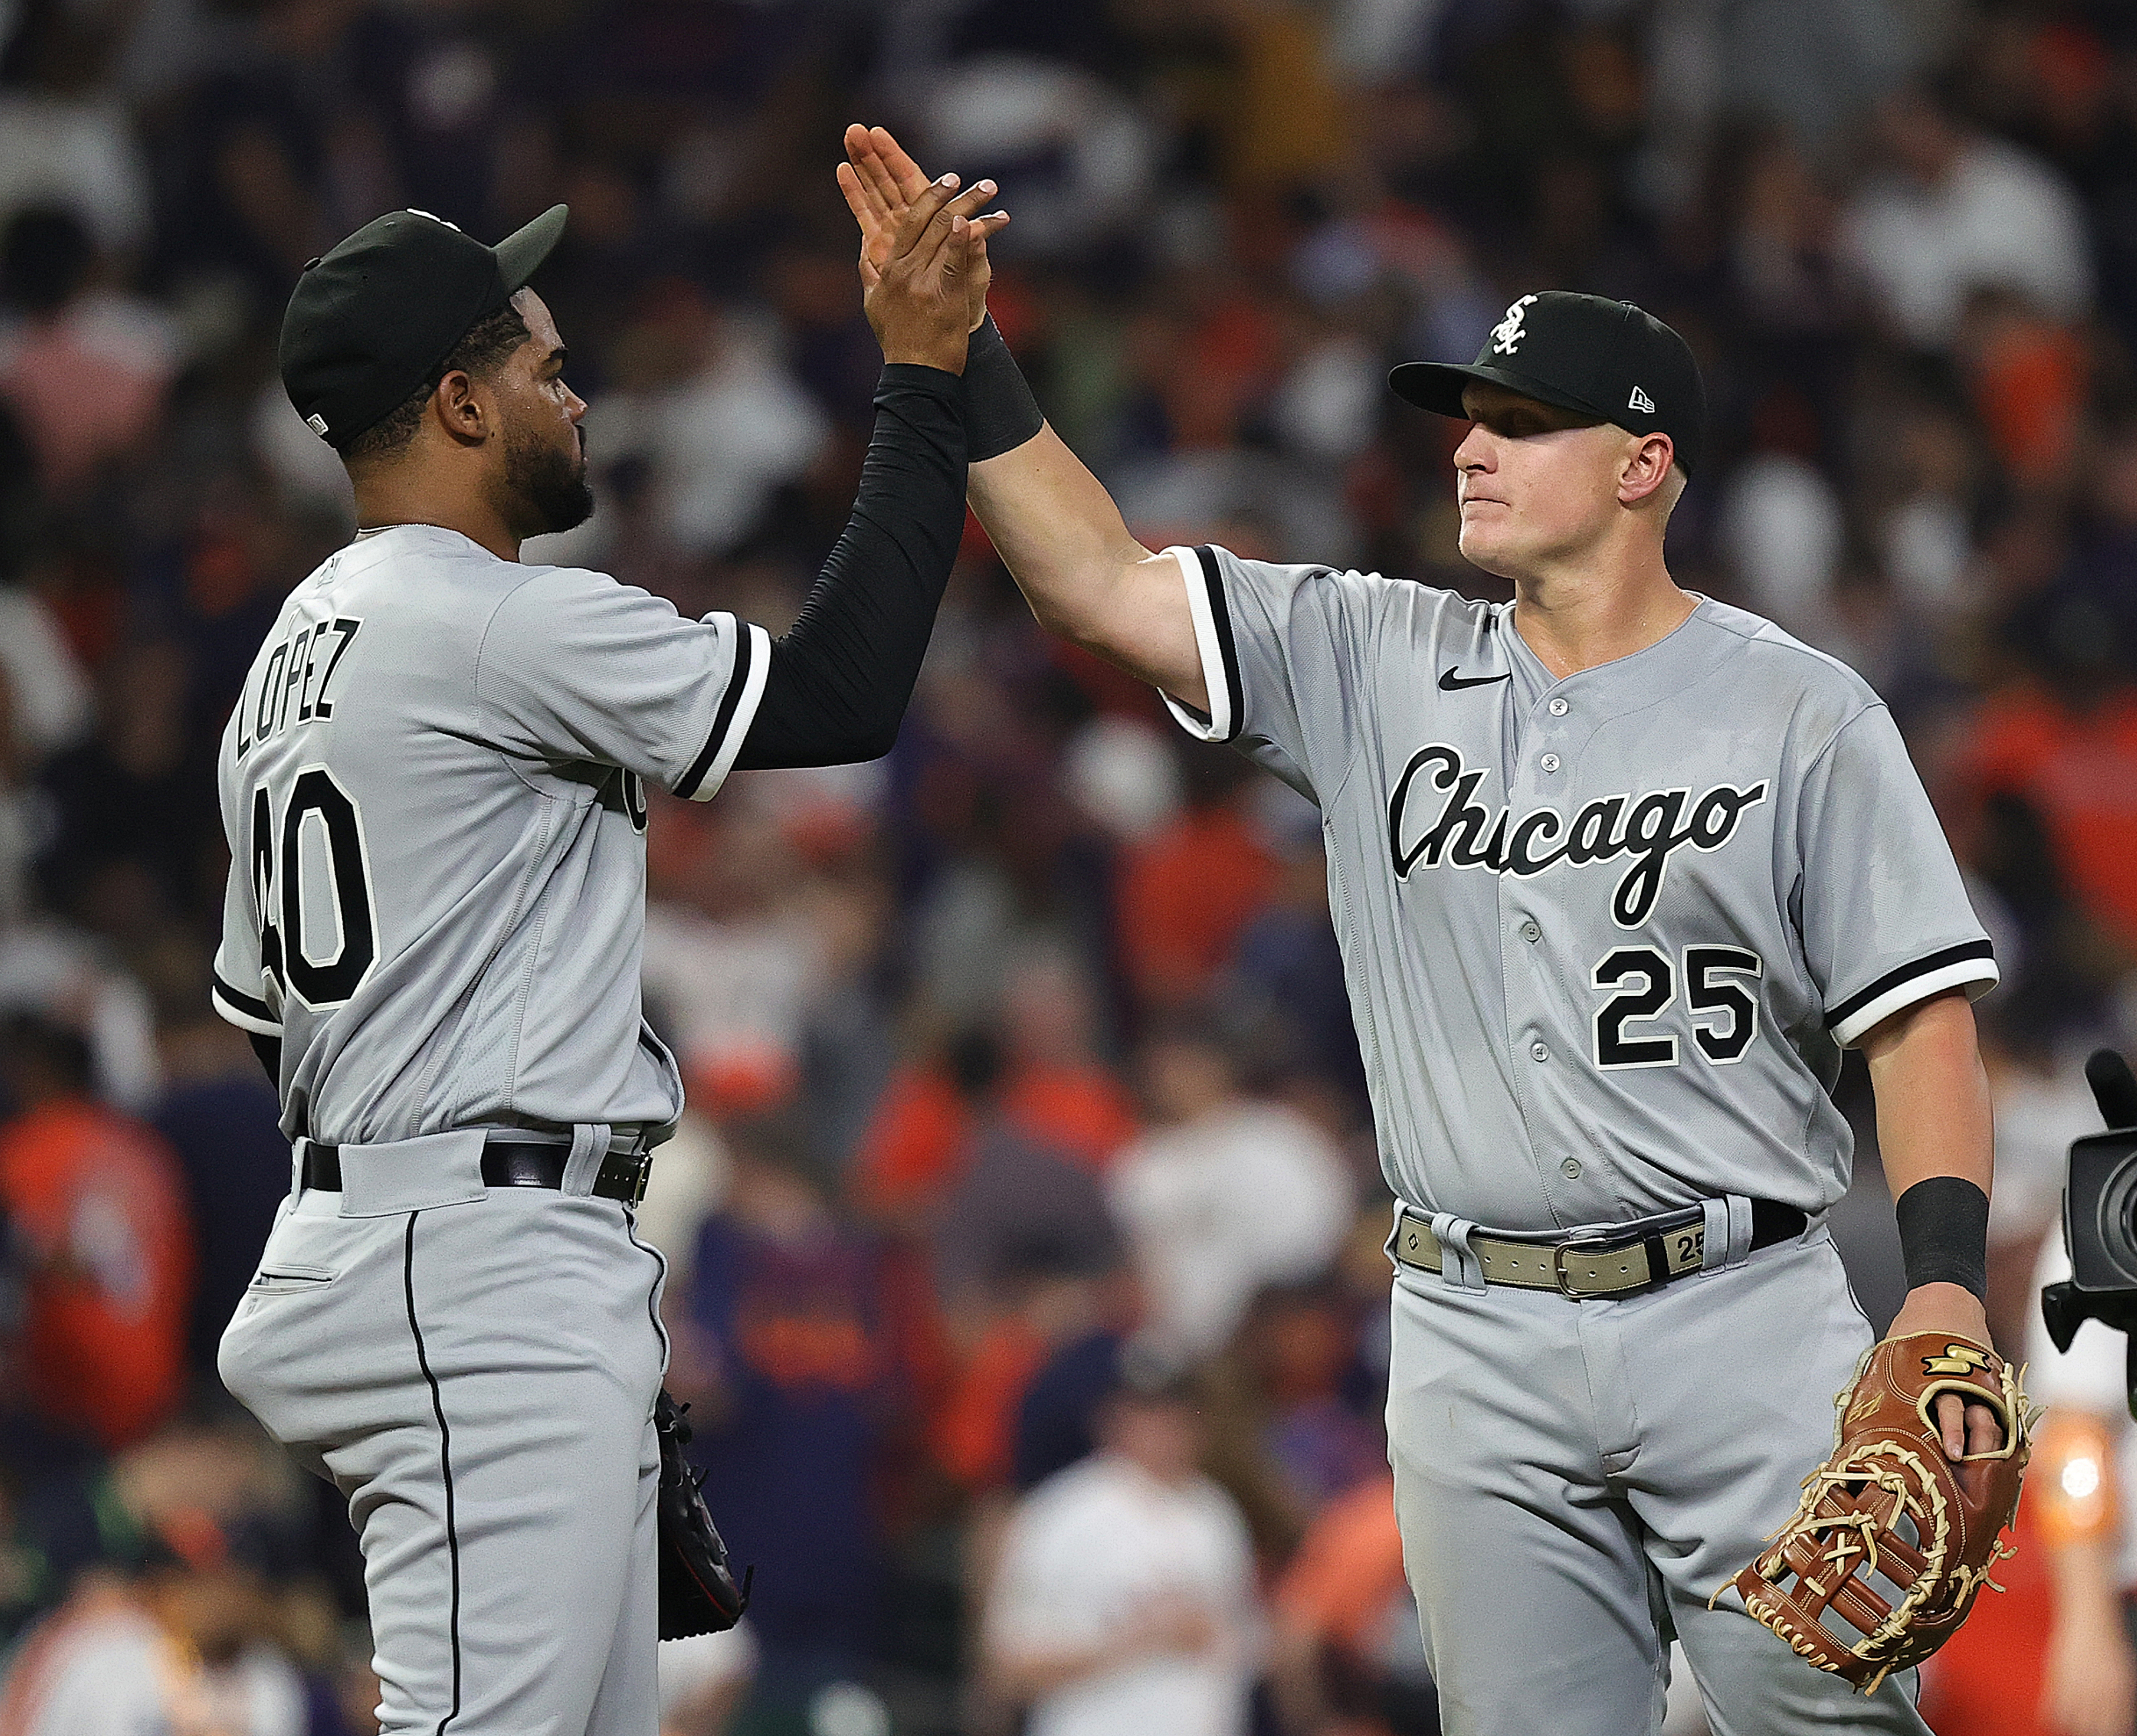 Chicago White Sox win their Opening Day game in Houston